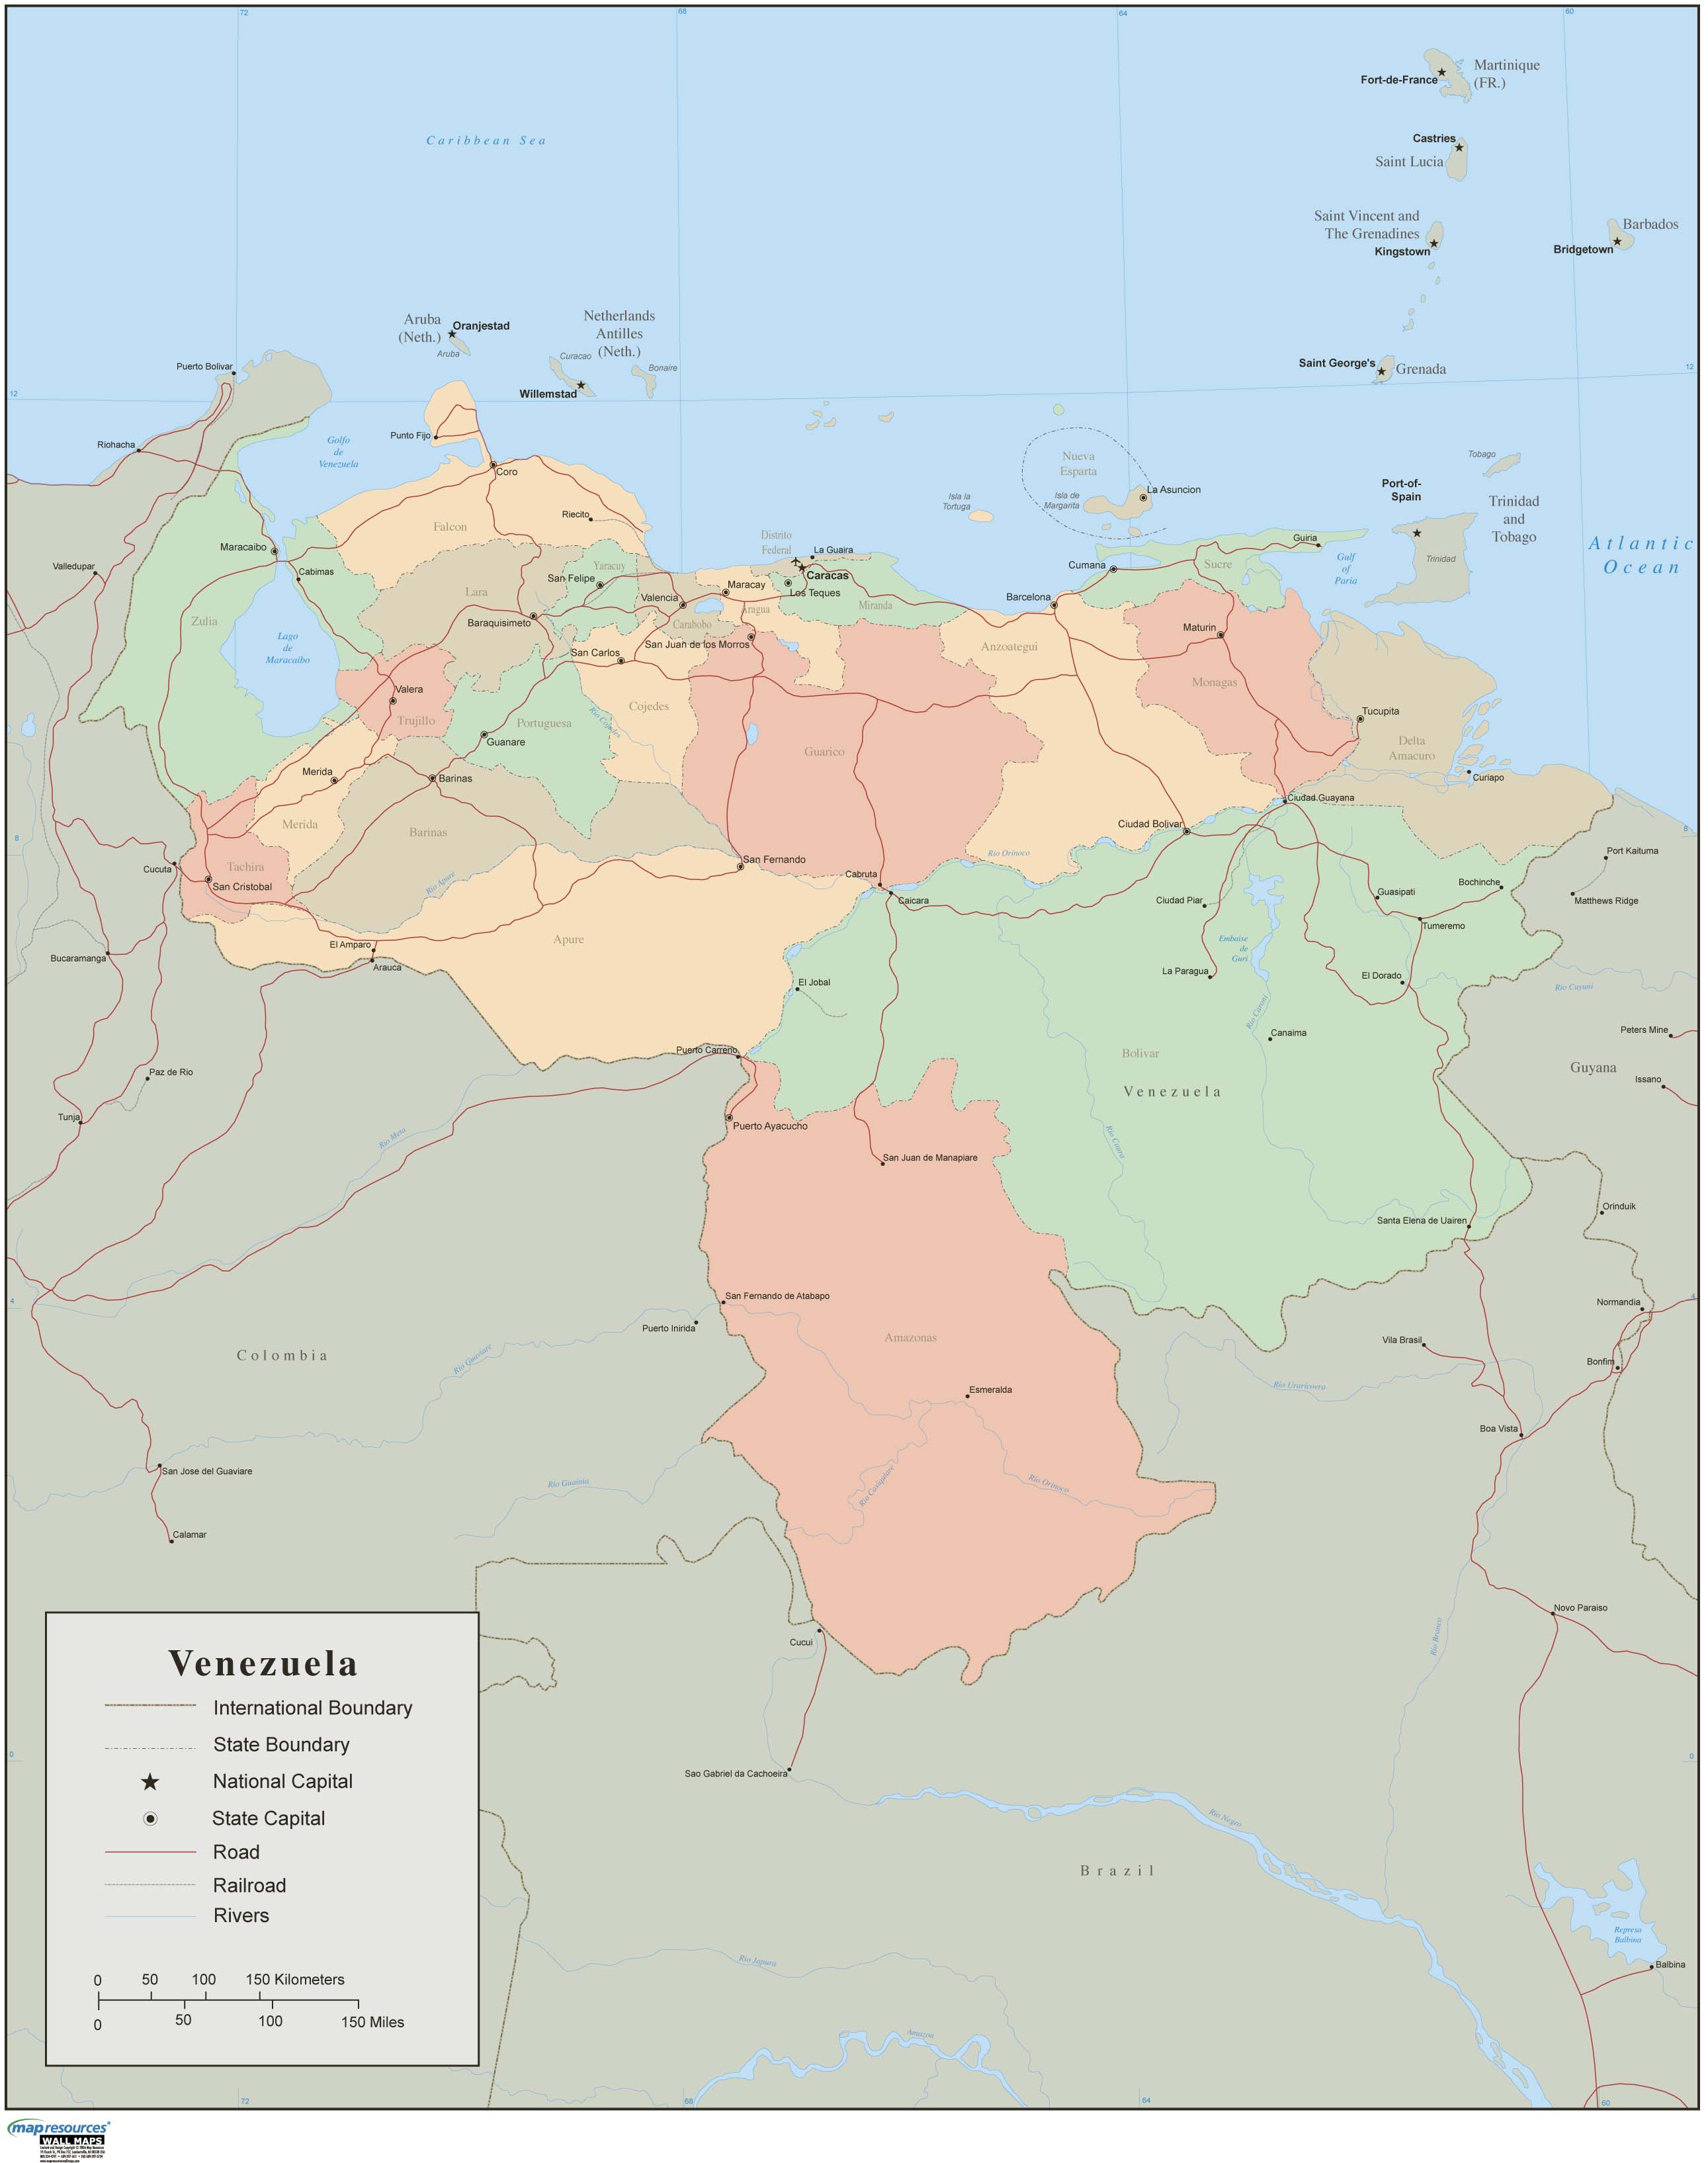 Venezuela Wall Map by Map Resources - MapSales